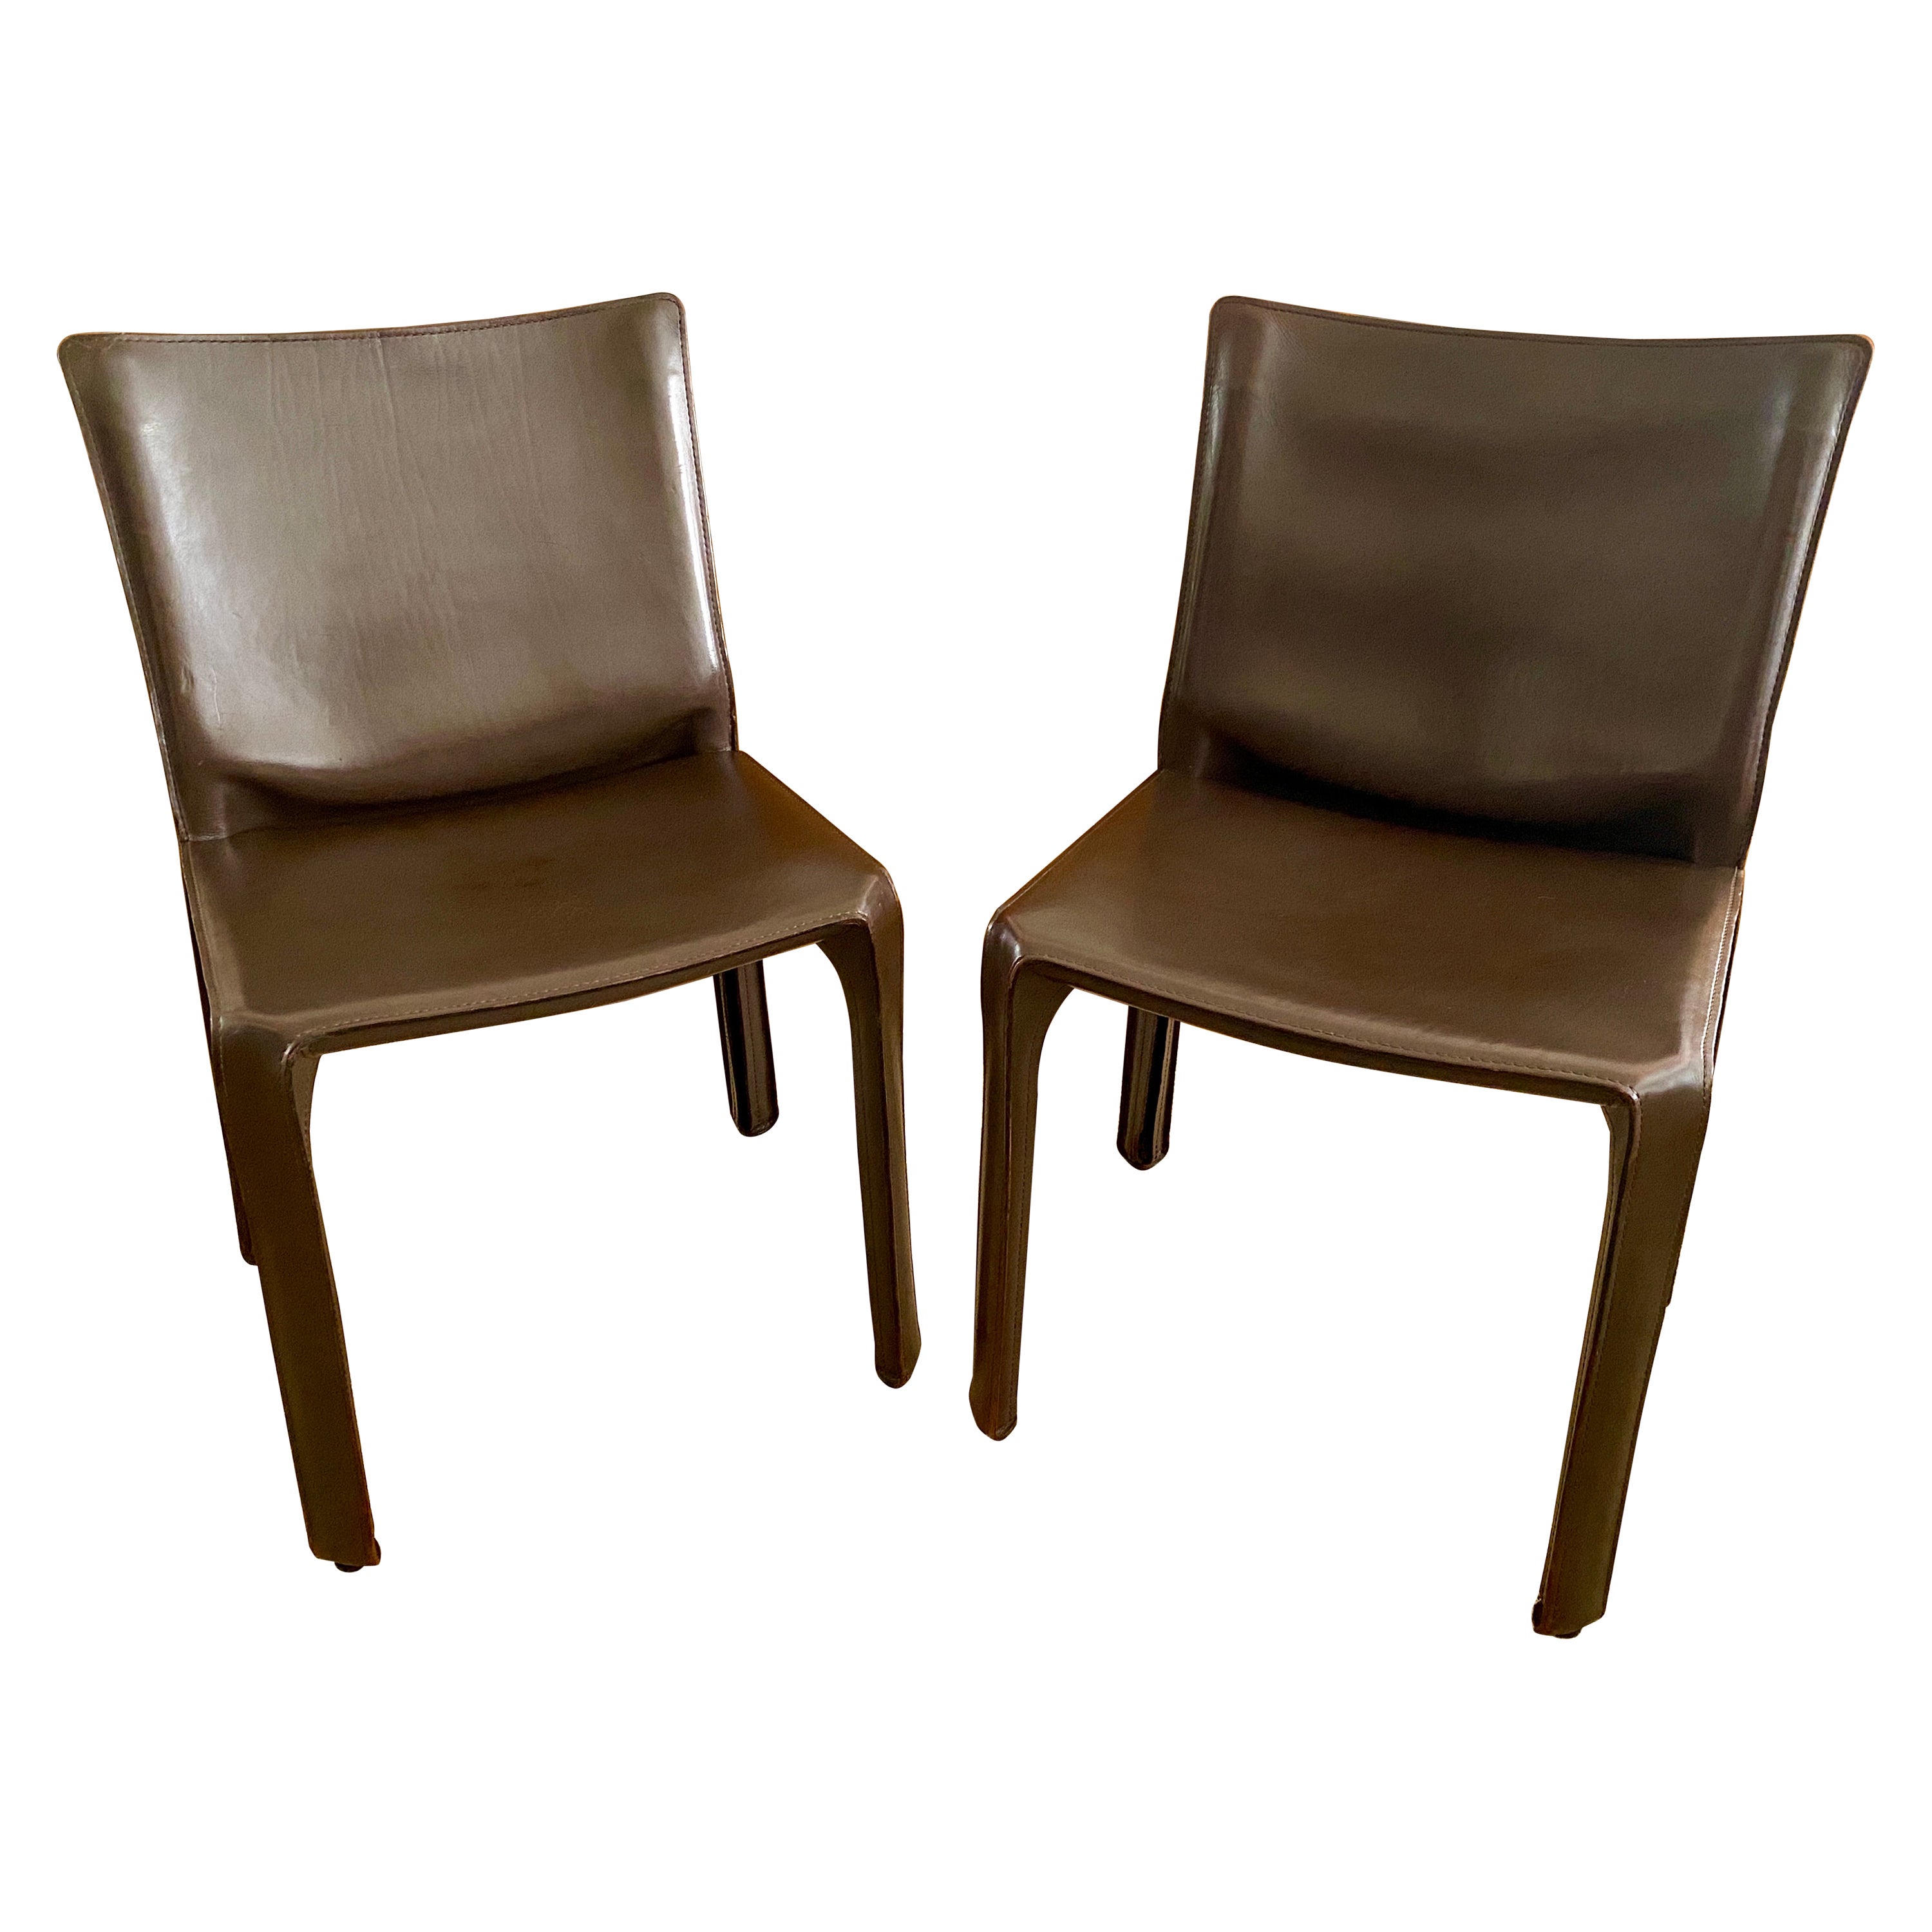 Two Dark Brown CAB 412 Chairs Designed by Mario Bellini for Cassina